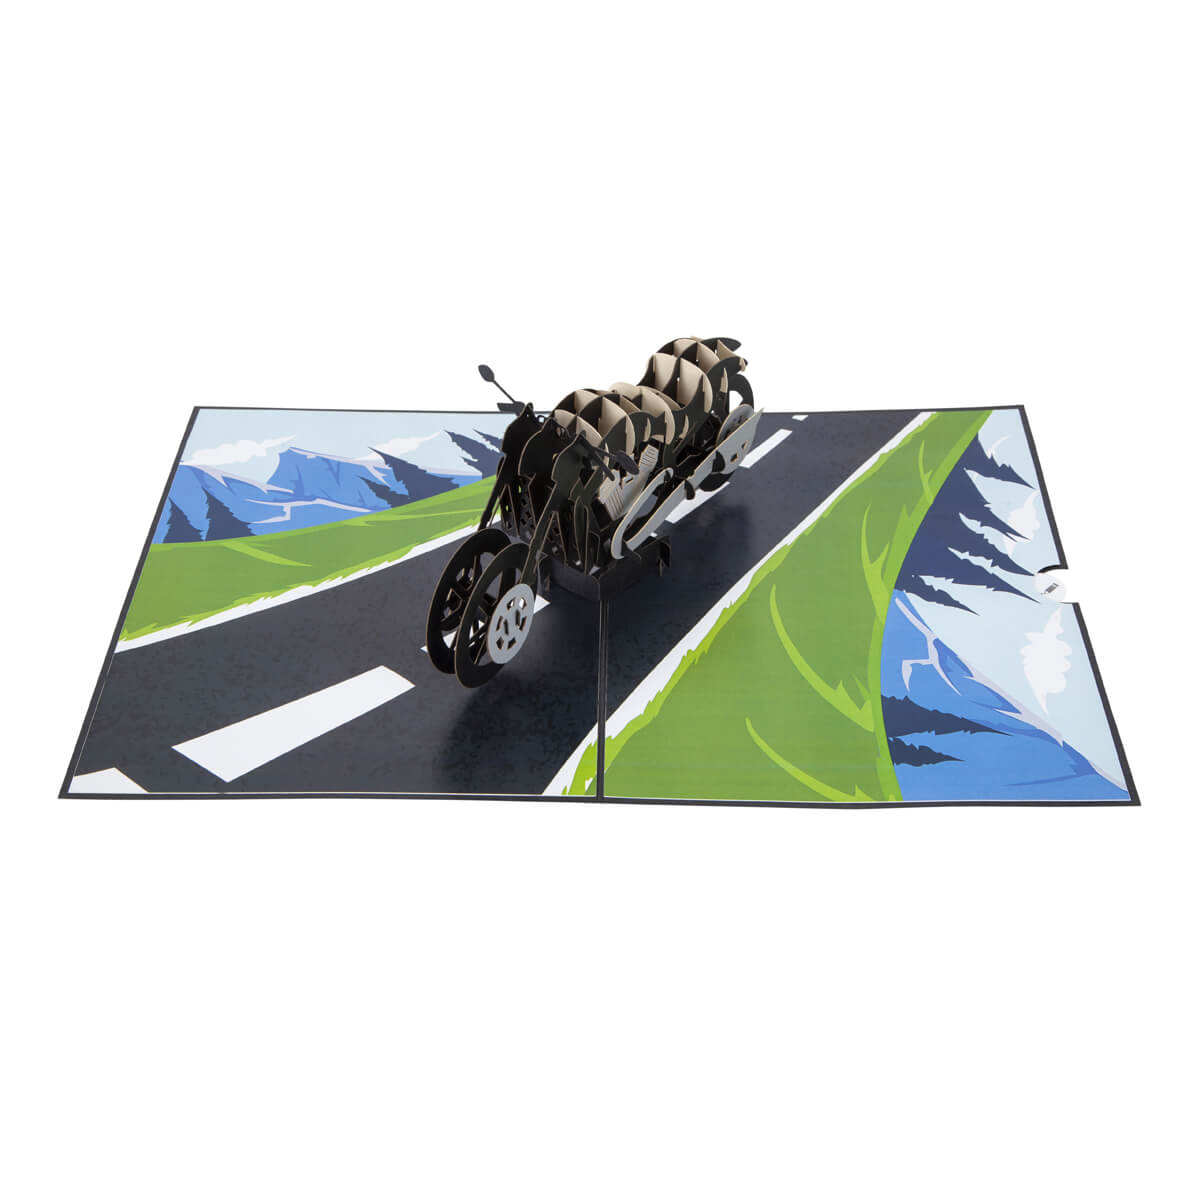 Motorbike Pop-Up Any Occasion Greeting Card Blank Inside